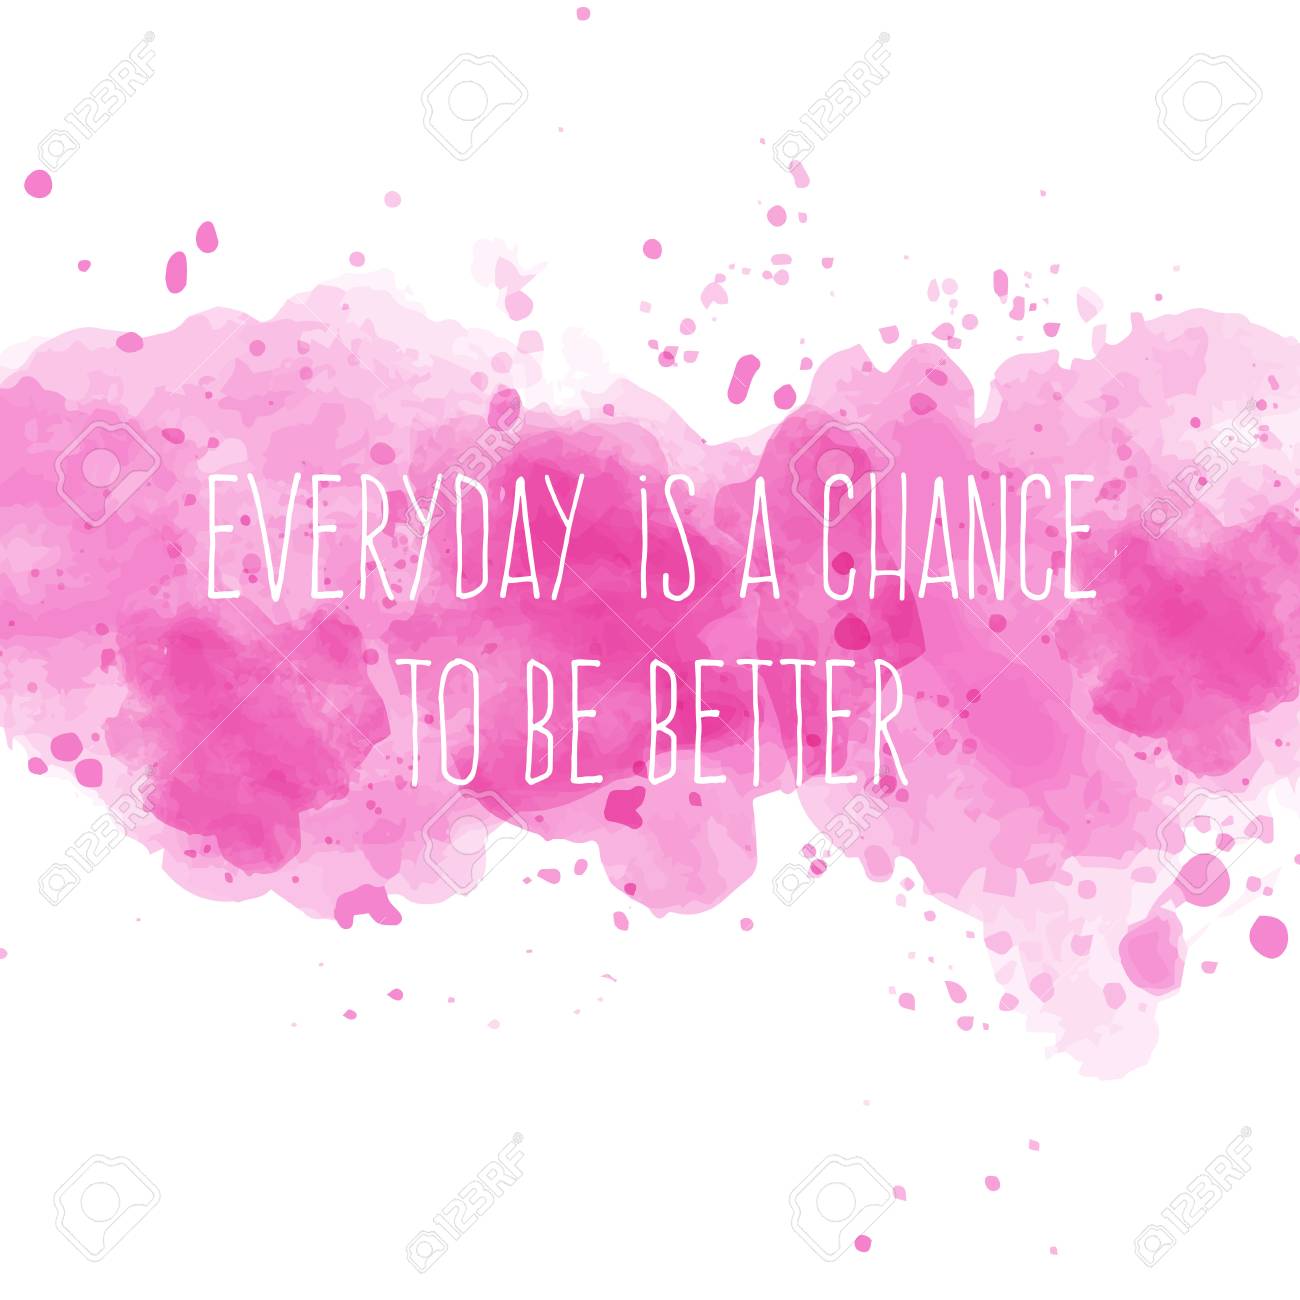 Motivational Quote On Watercolor Background Everyday Is A Chance